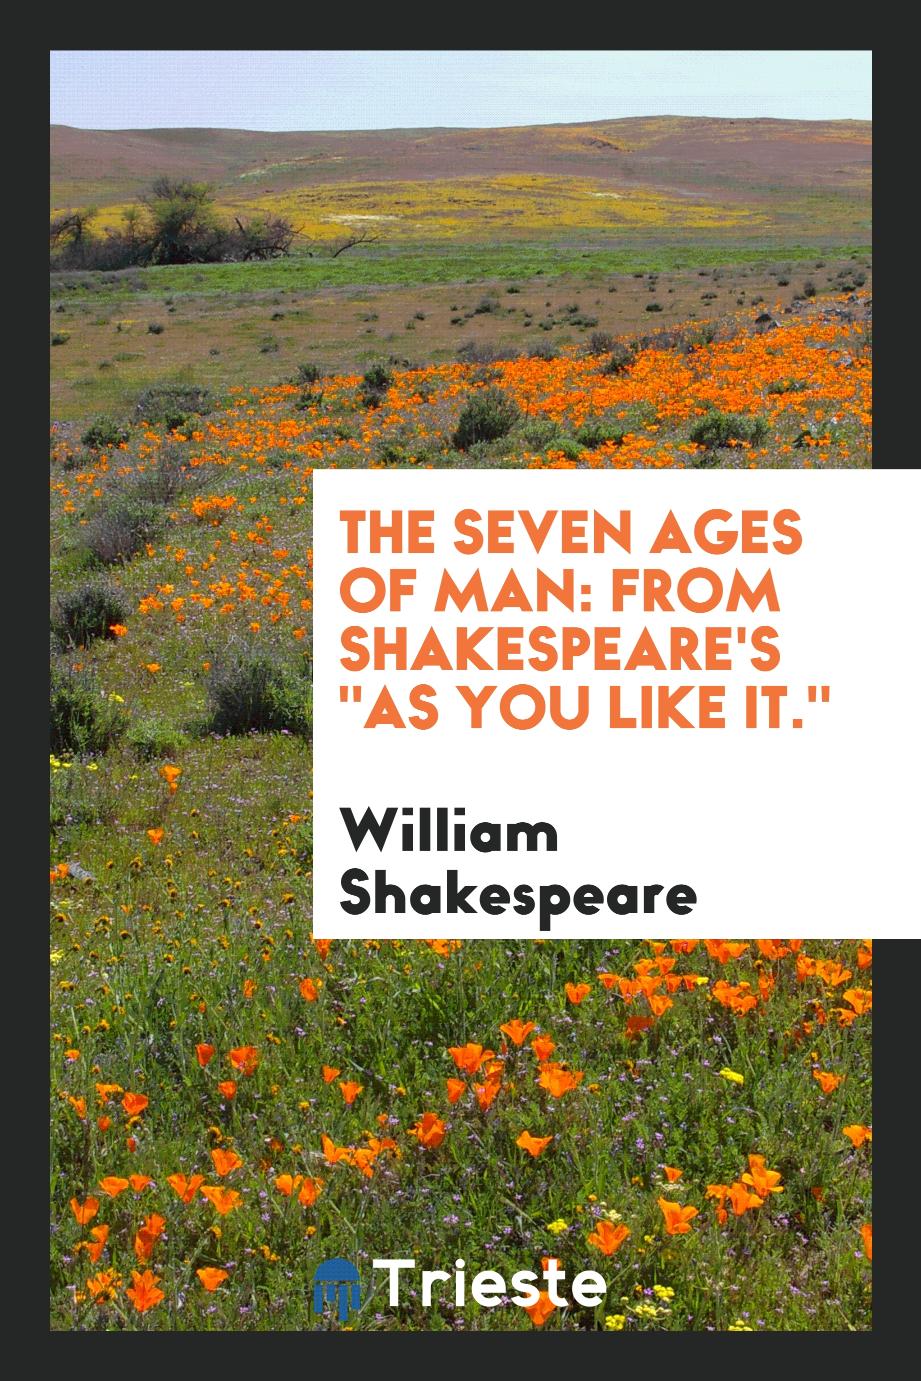 The Seven Ages of Man: From Shakespeare's "As You Like It."